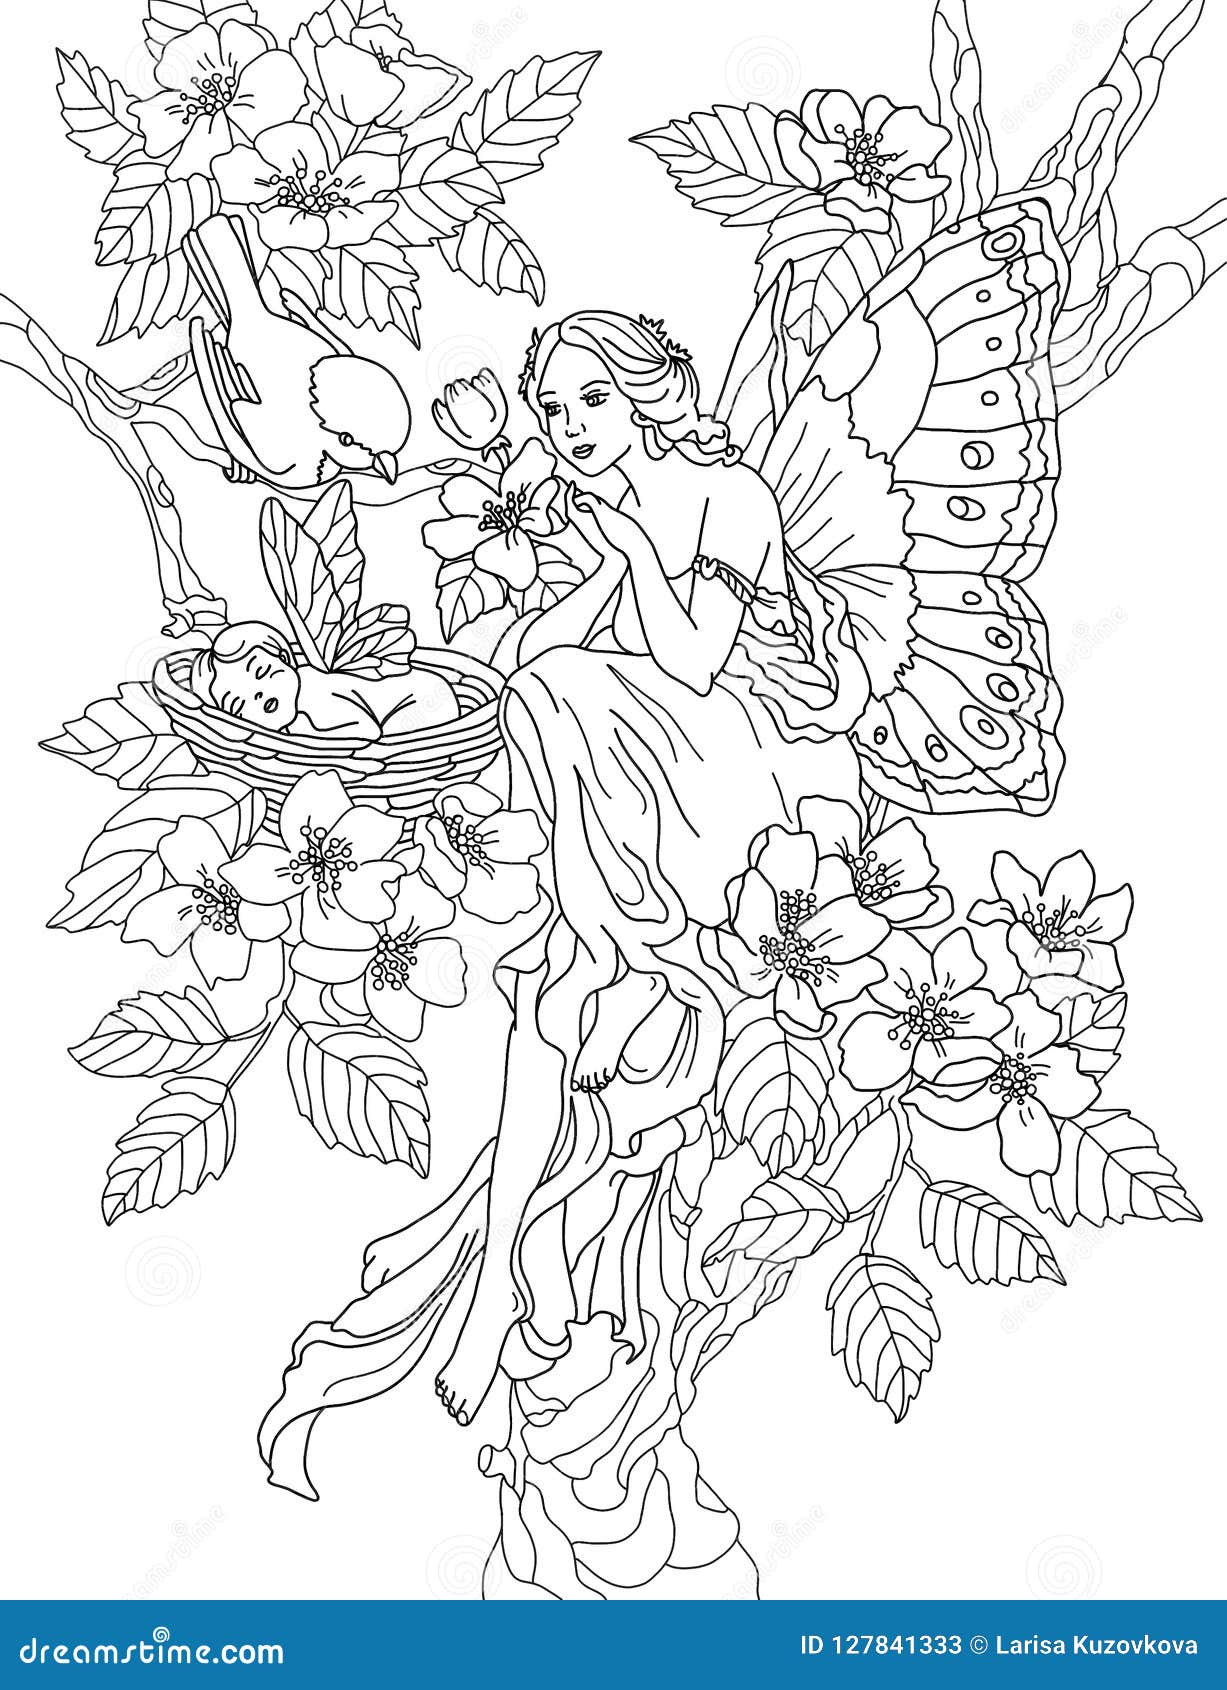 Fairy coloring page stock illustrations â fairy coloring page stock illustrations vectors clipart